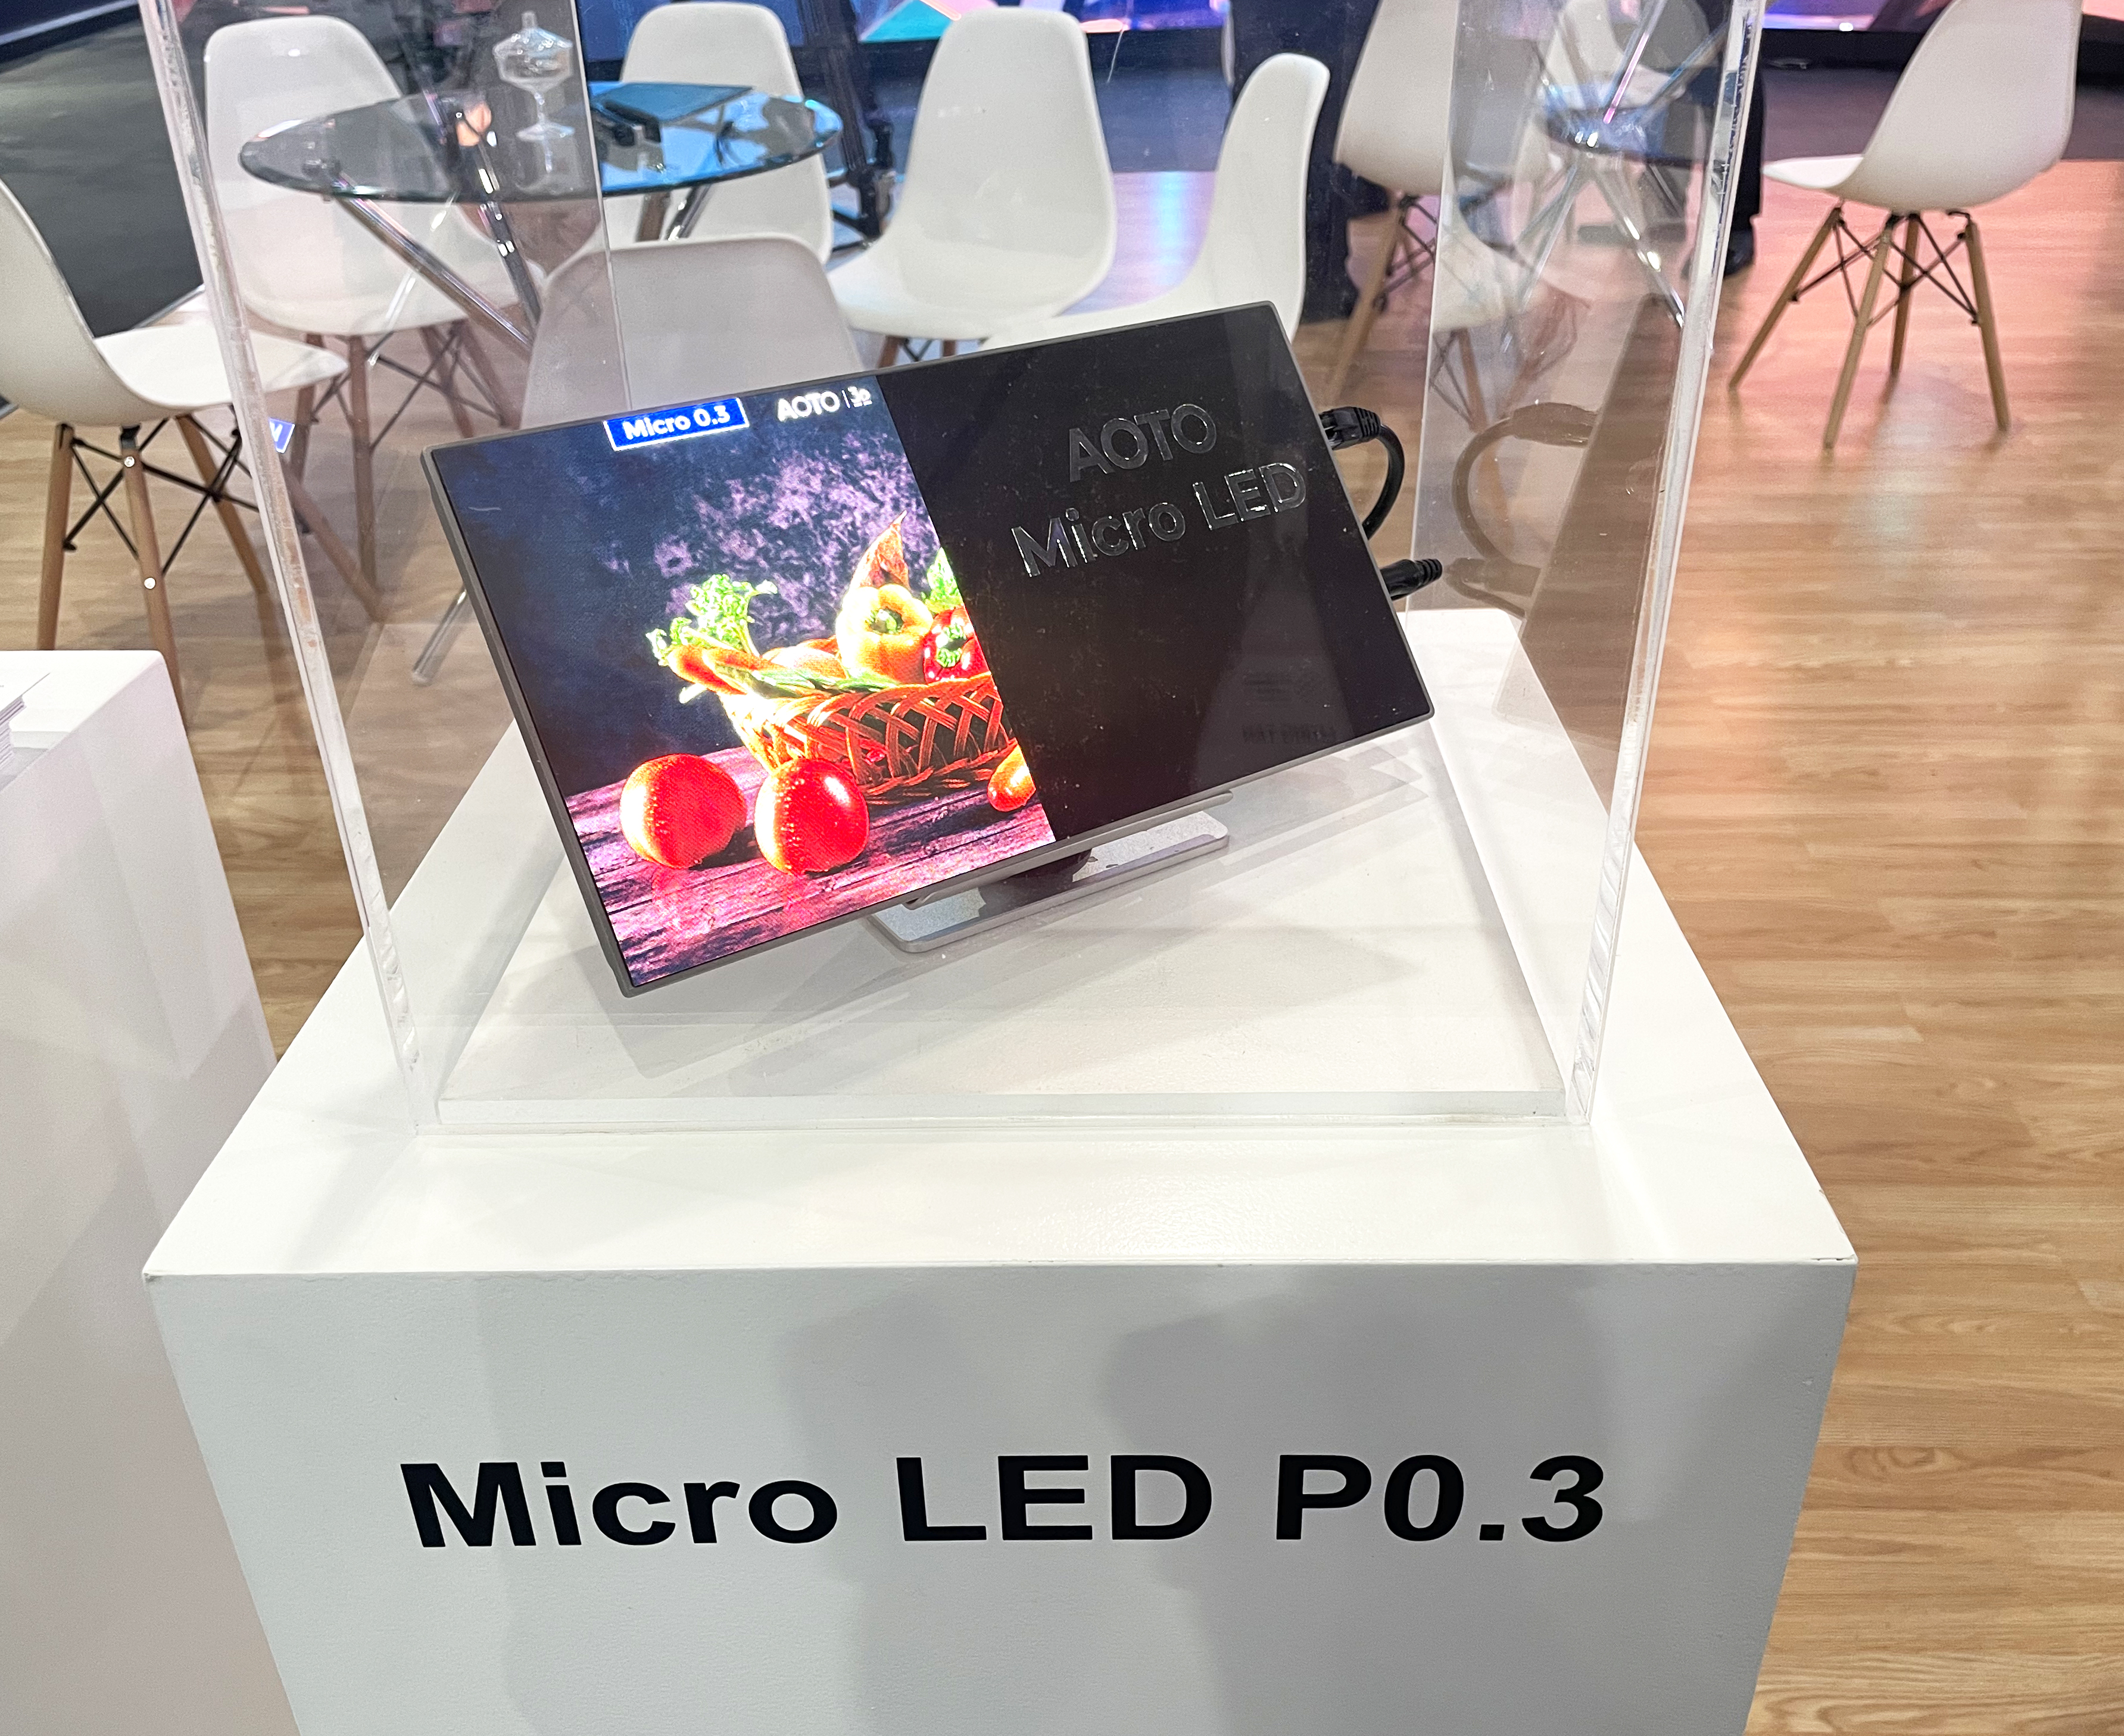 AOTO Madede an Advance Progress in Micro-LED-Based Display Technologies